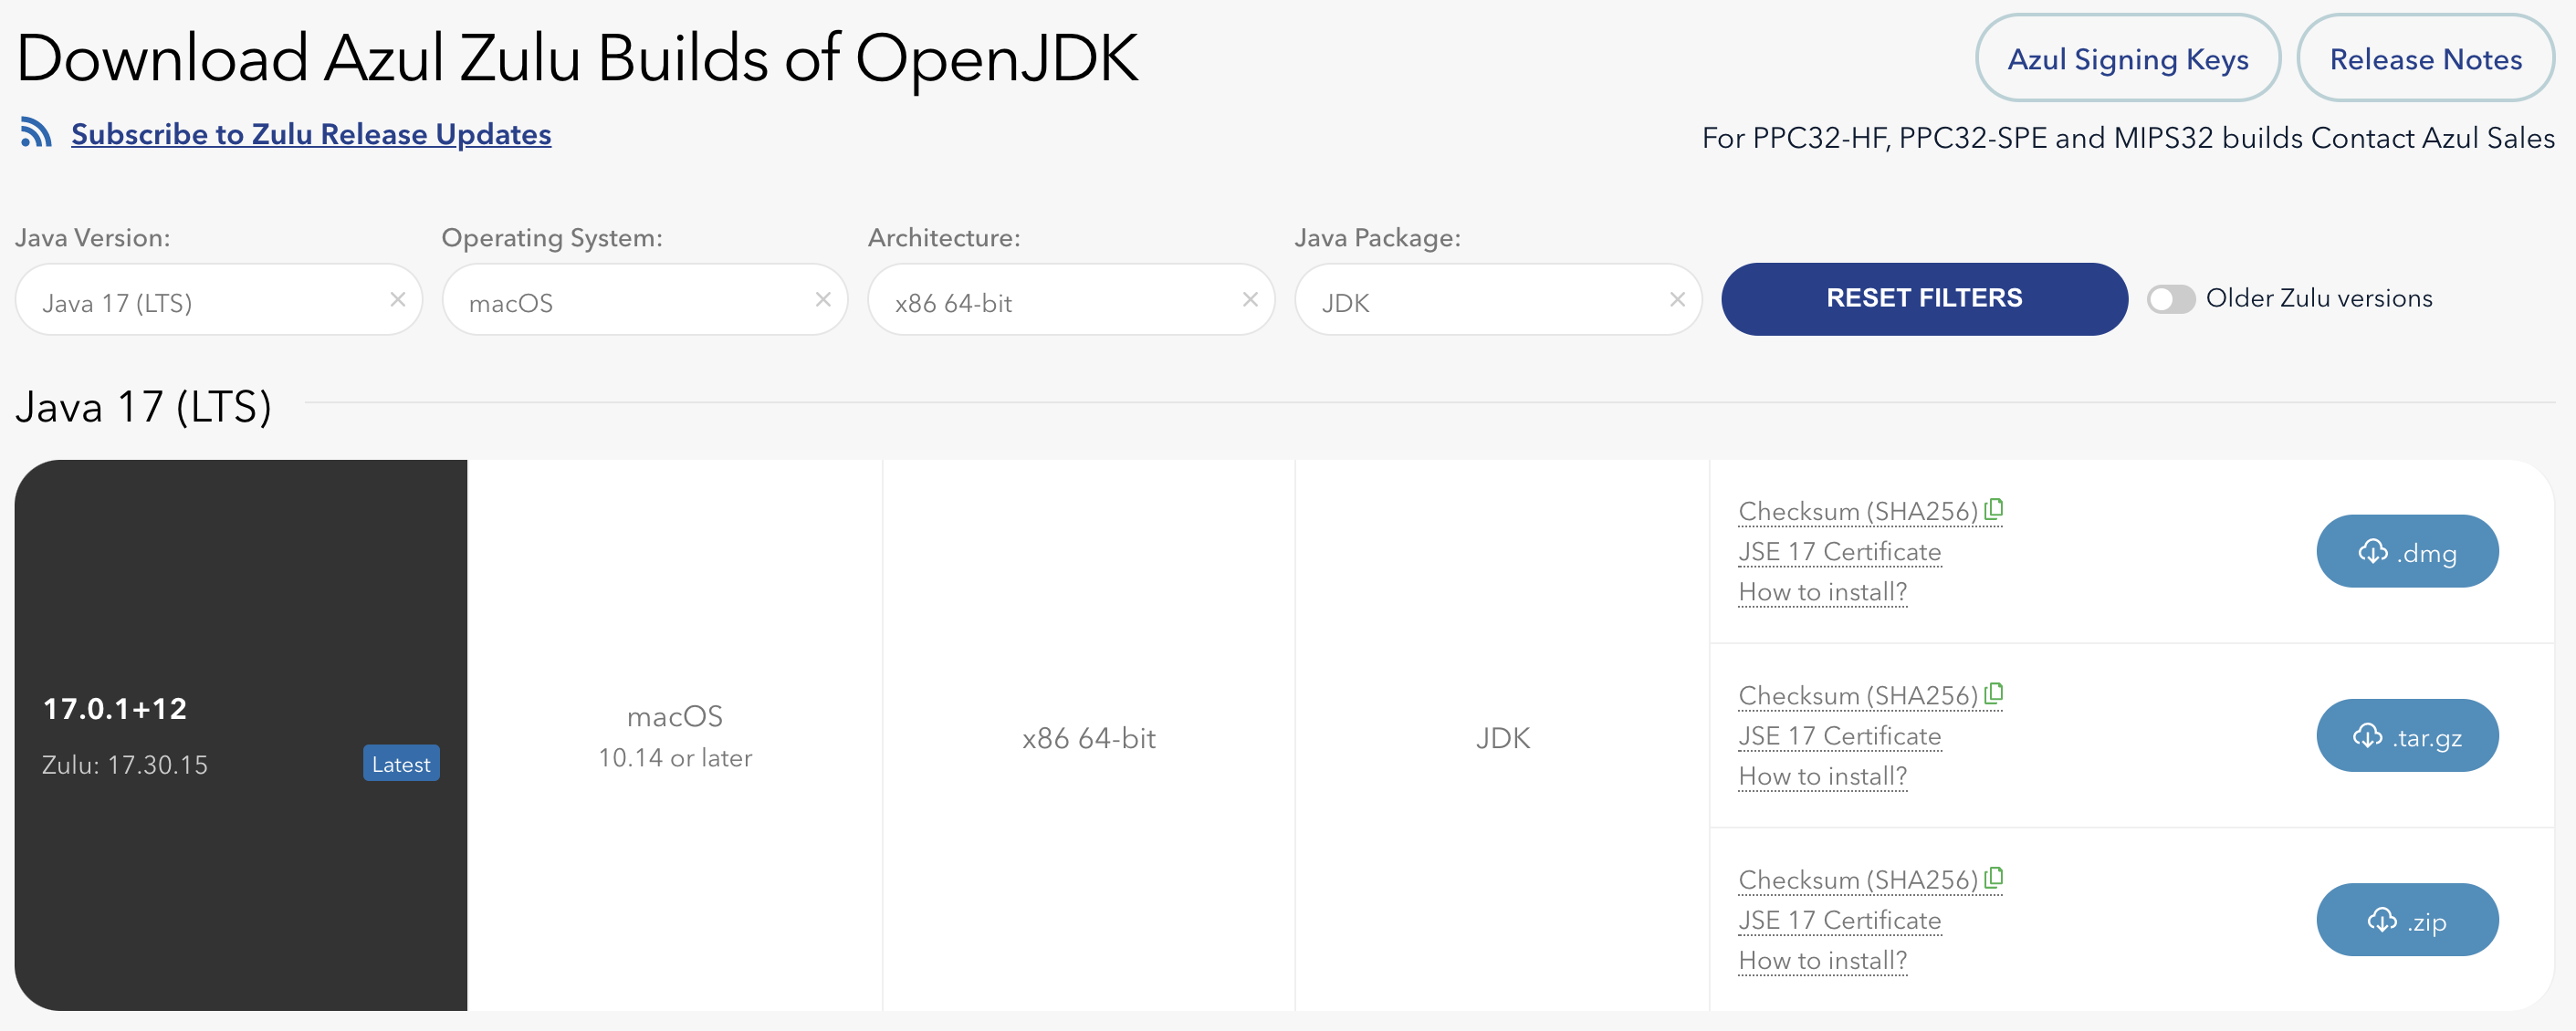 Screenshot of the download page of Azul Zulu Builds of OpenJDK